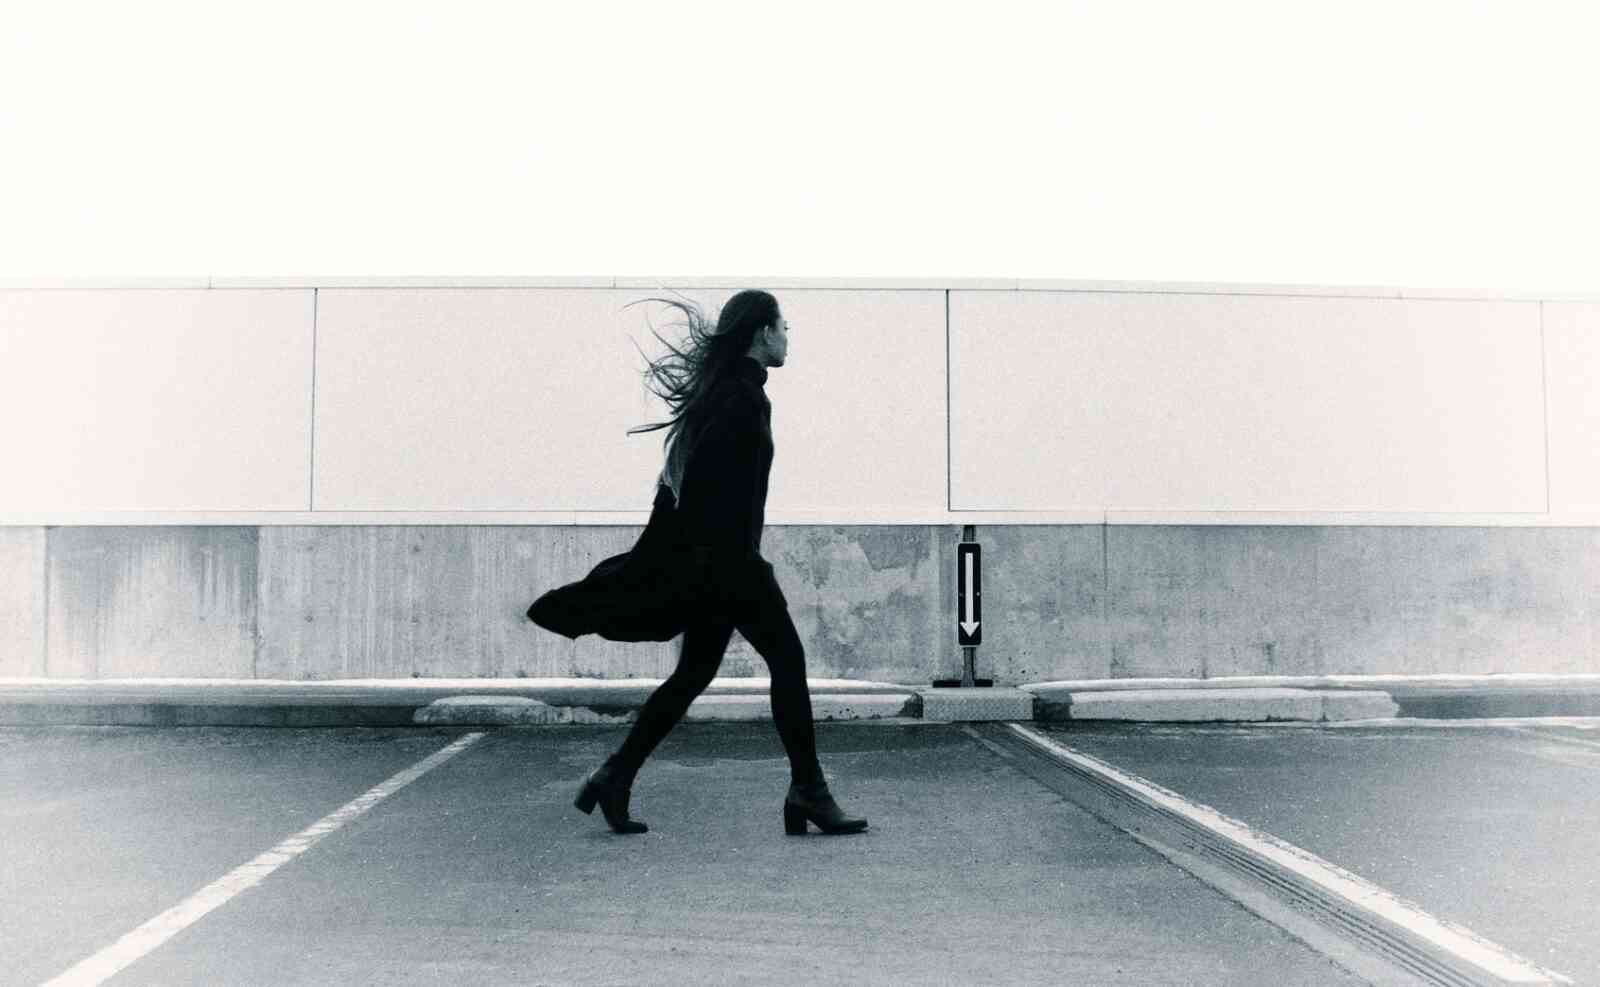 Death and life with chronic illness. A woman in boots and a long black coat walks across a parking lot.